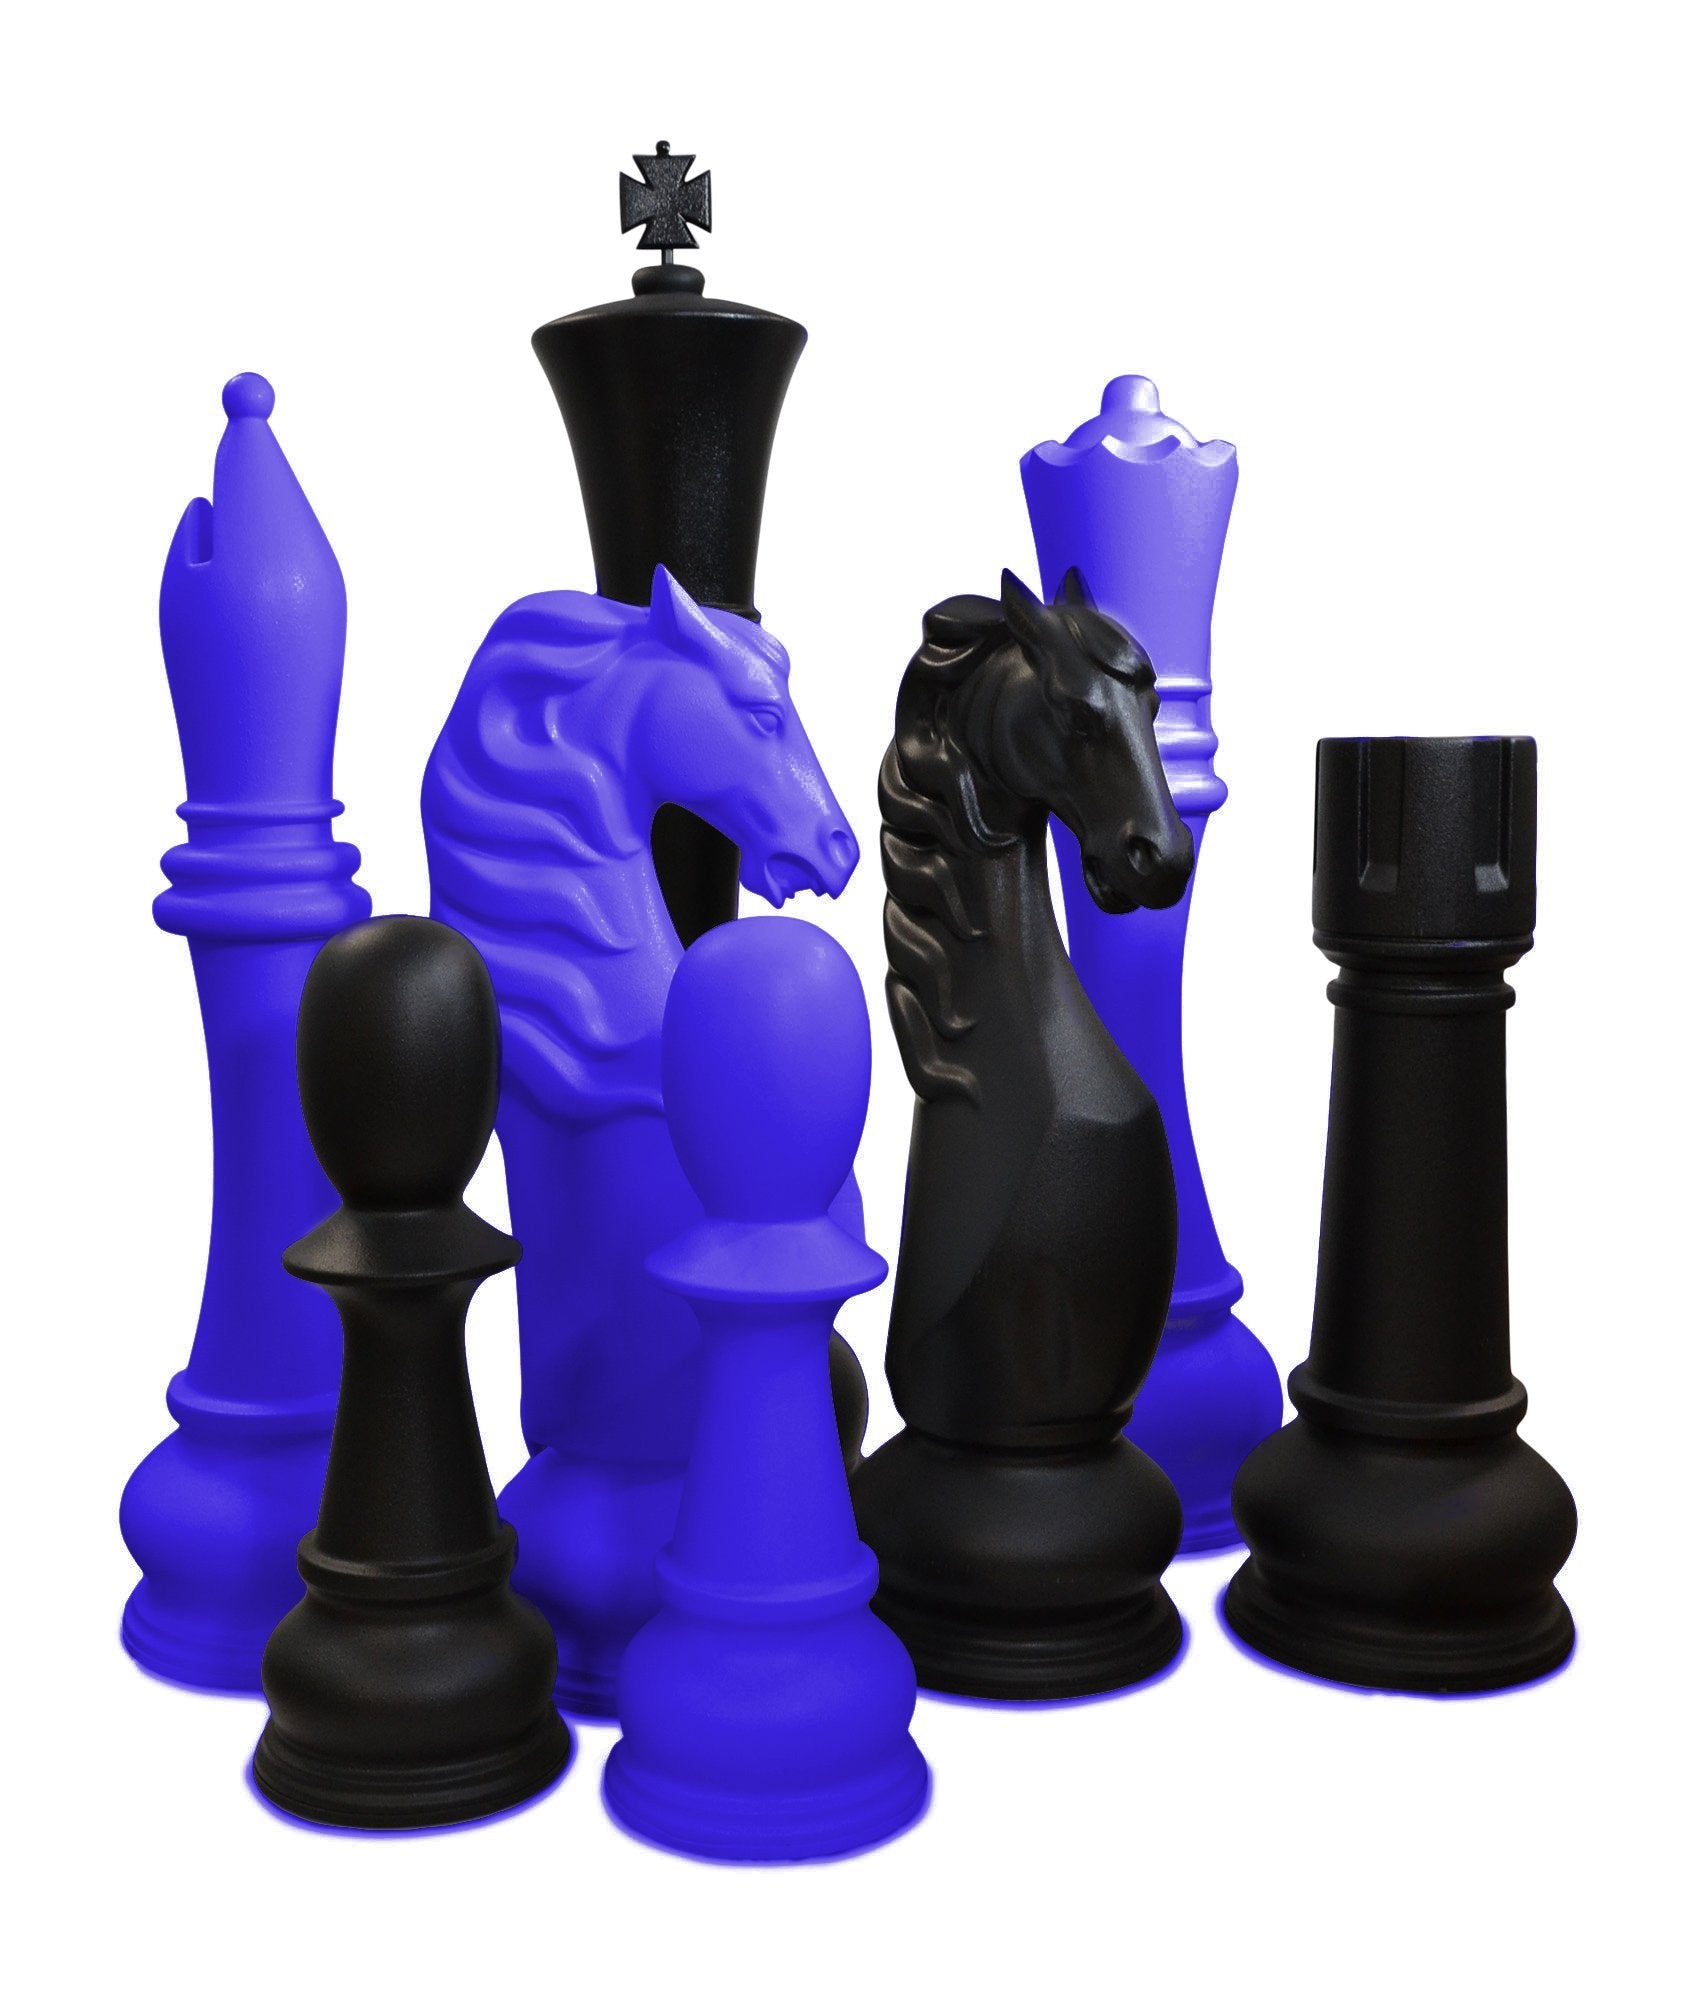 WE Games Garden Chess Set – Large 8 inch King, 35.5 inch Board – American  Chess Equipment